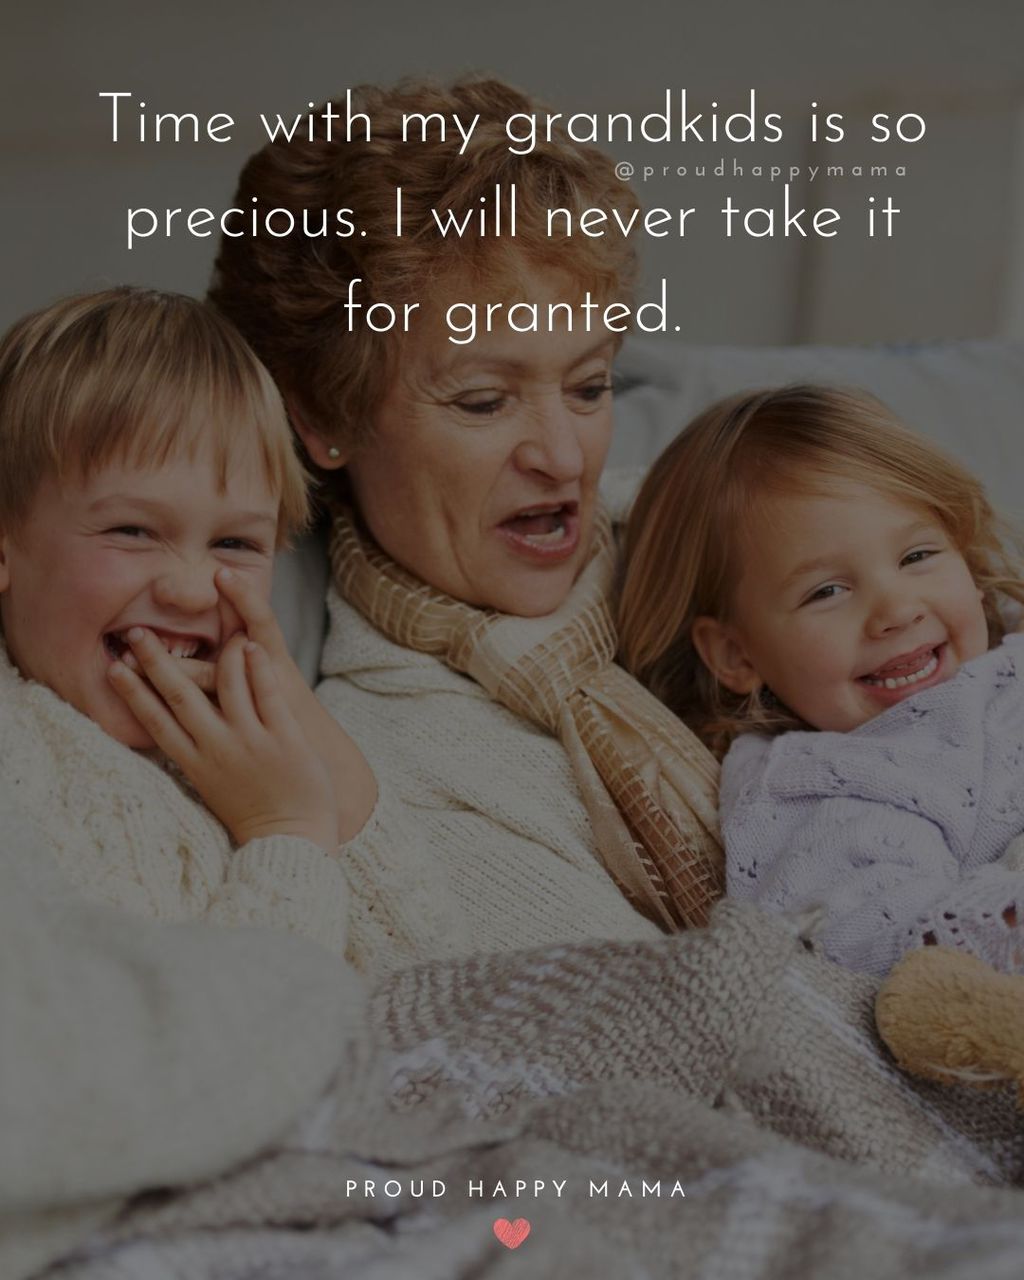 Quotes for Grandchildren - Time with my grandkids is so precious. I will never take it for granted.